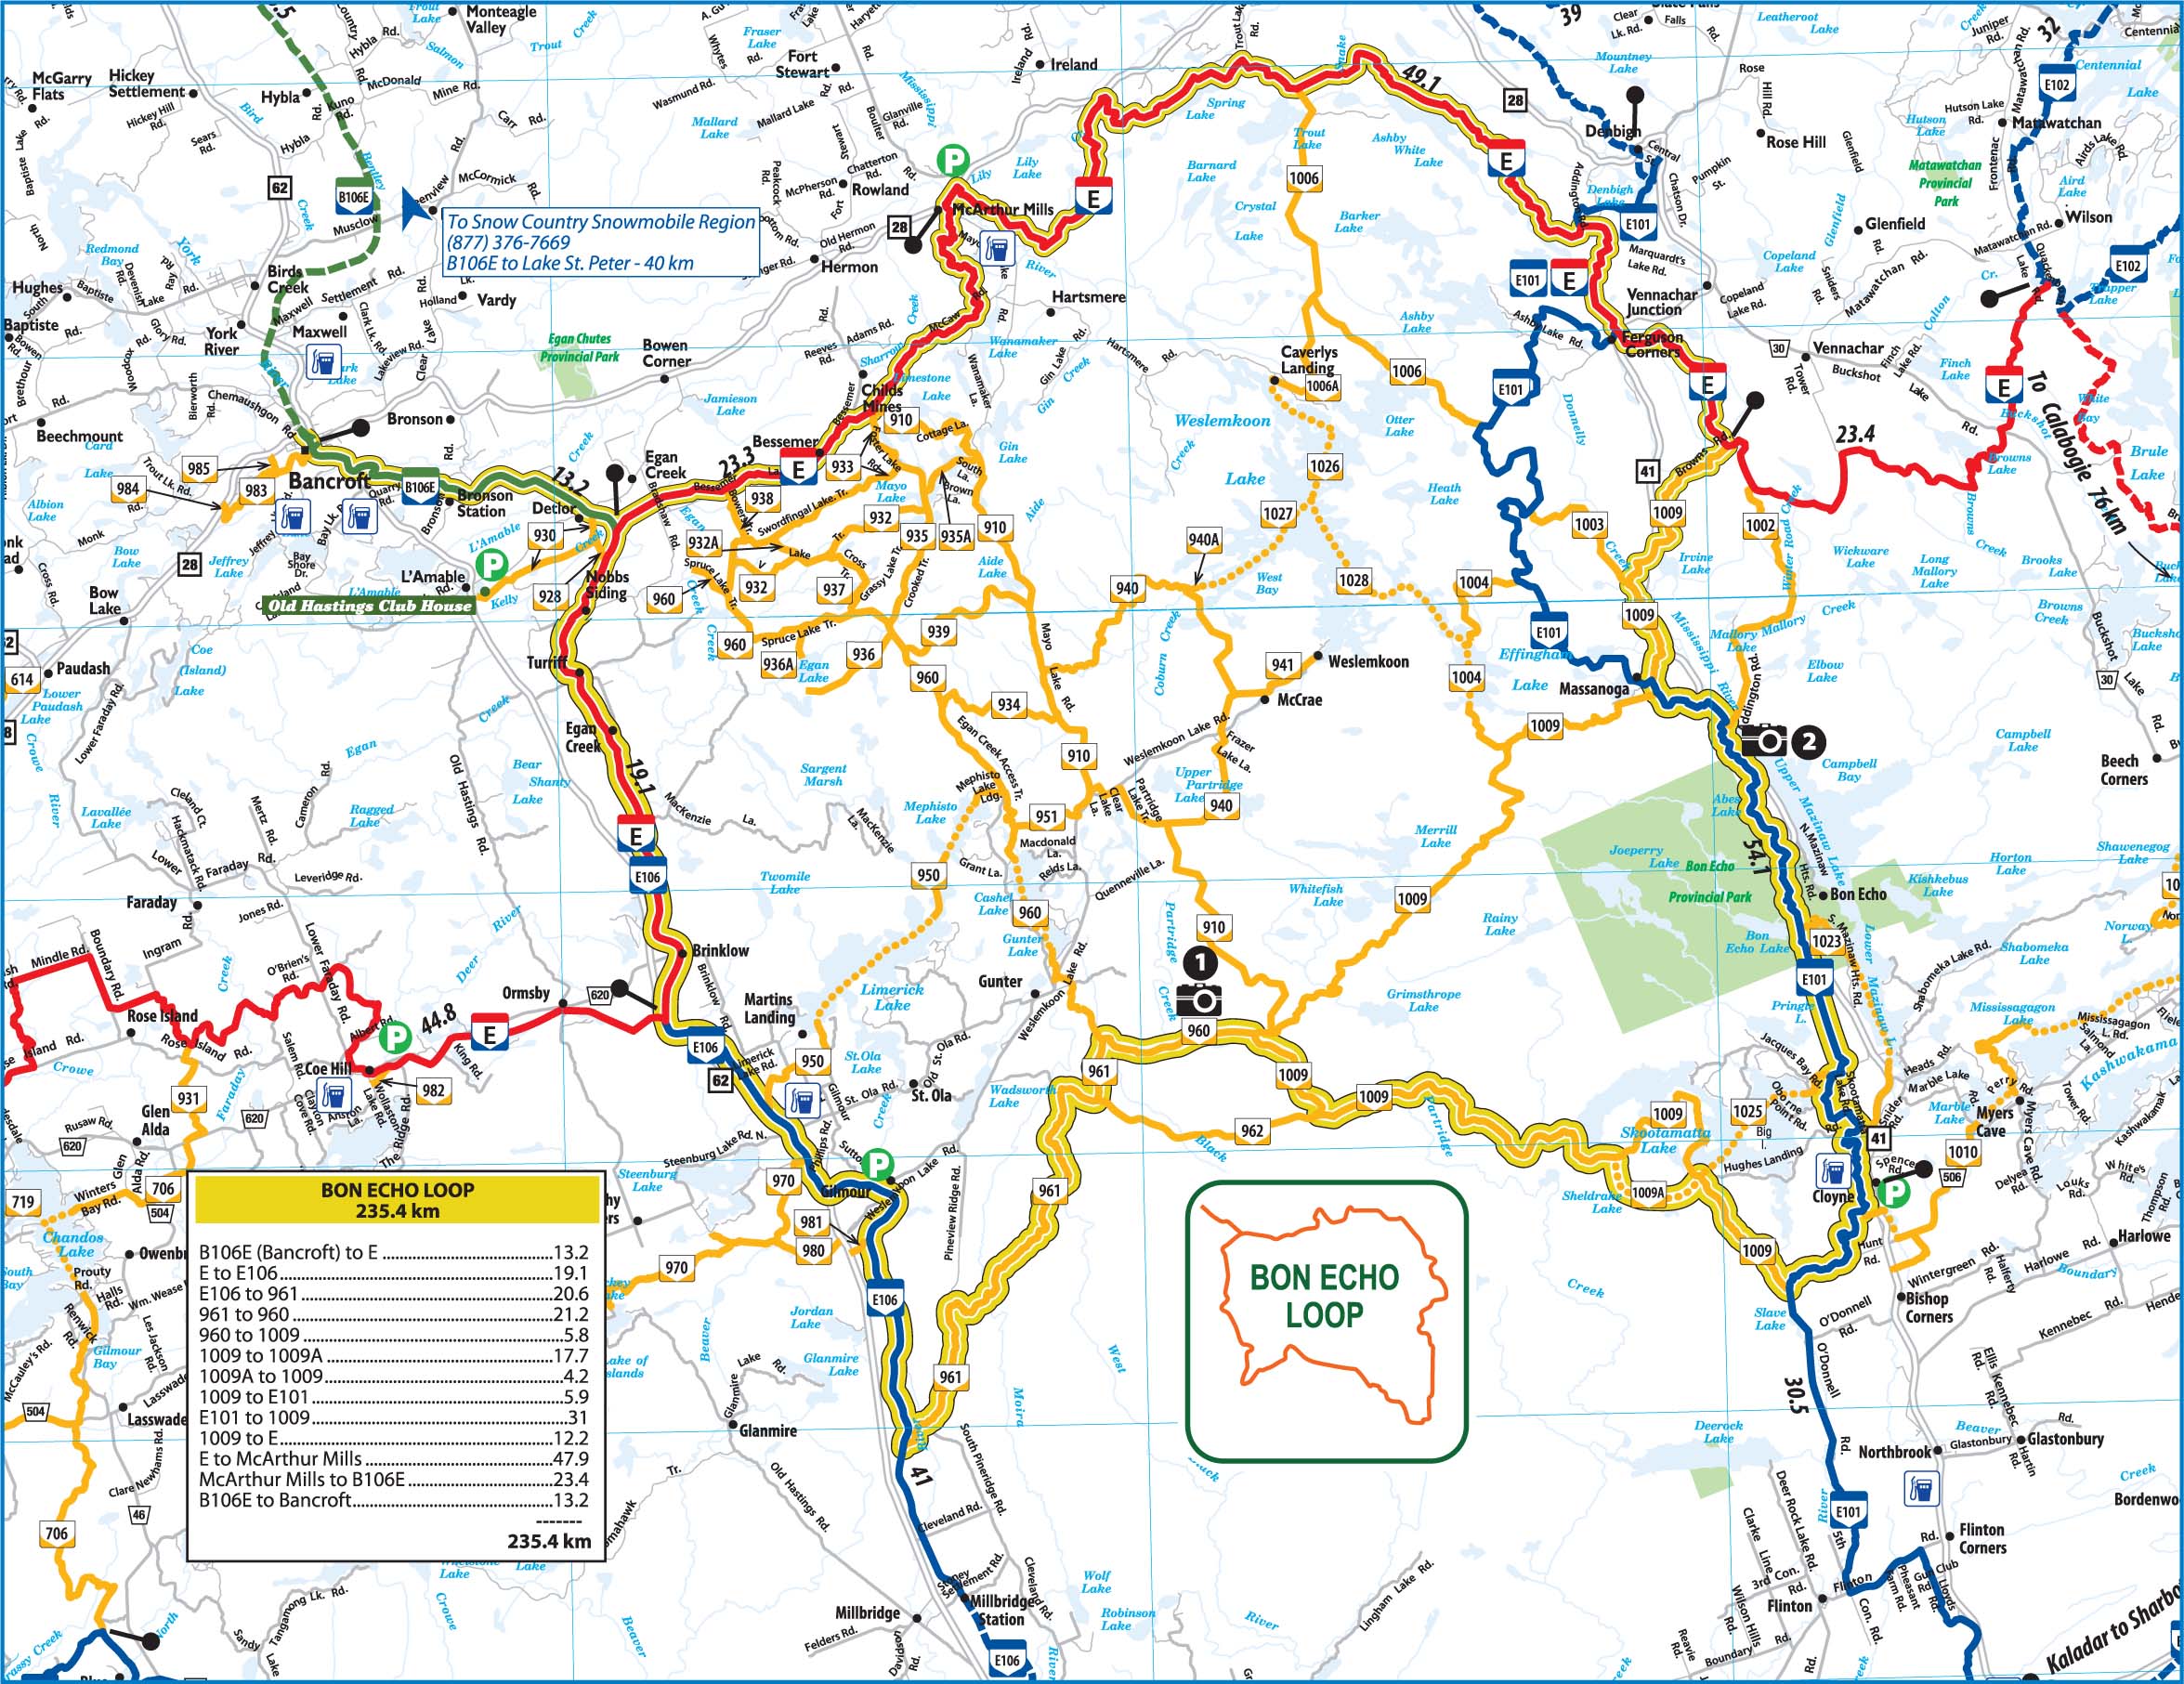 snowmobile trails maps ontario Trails District 2 Ofsc snowmobile trails maps ontario